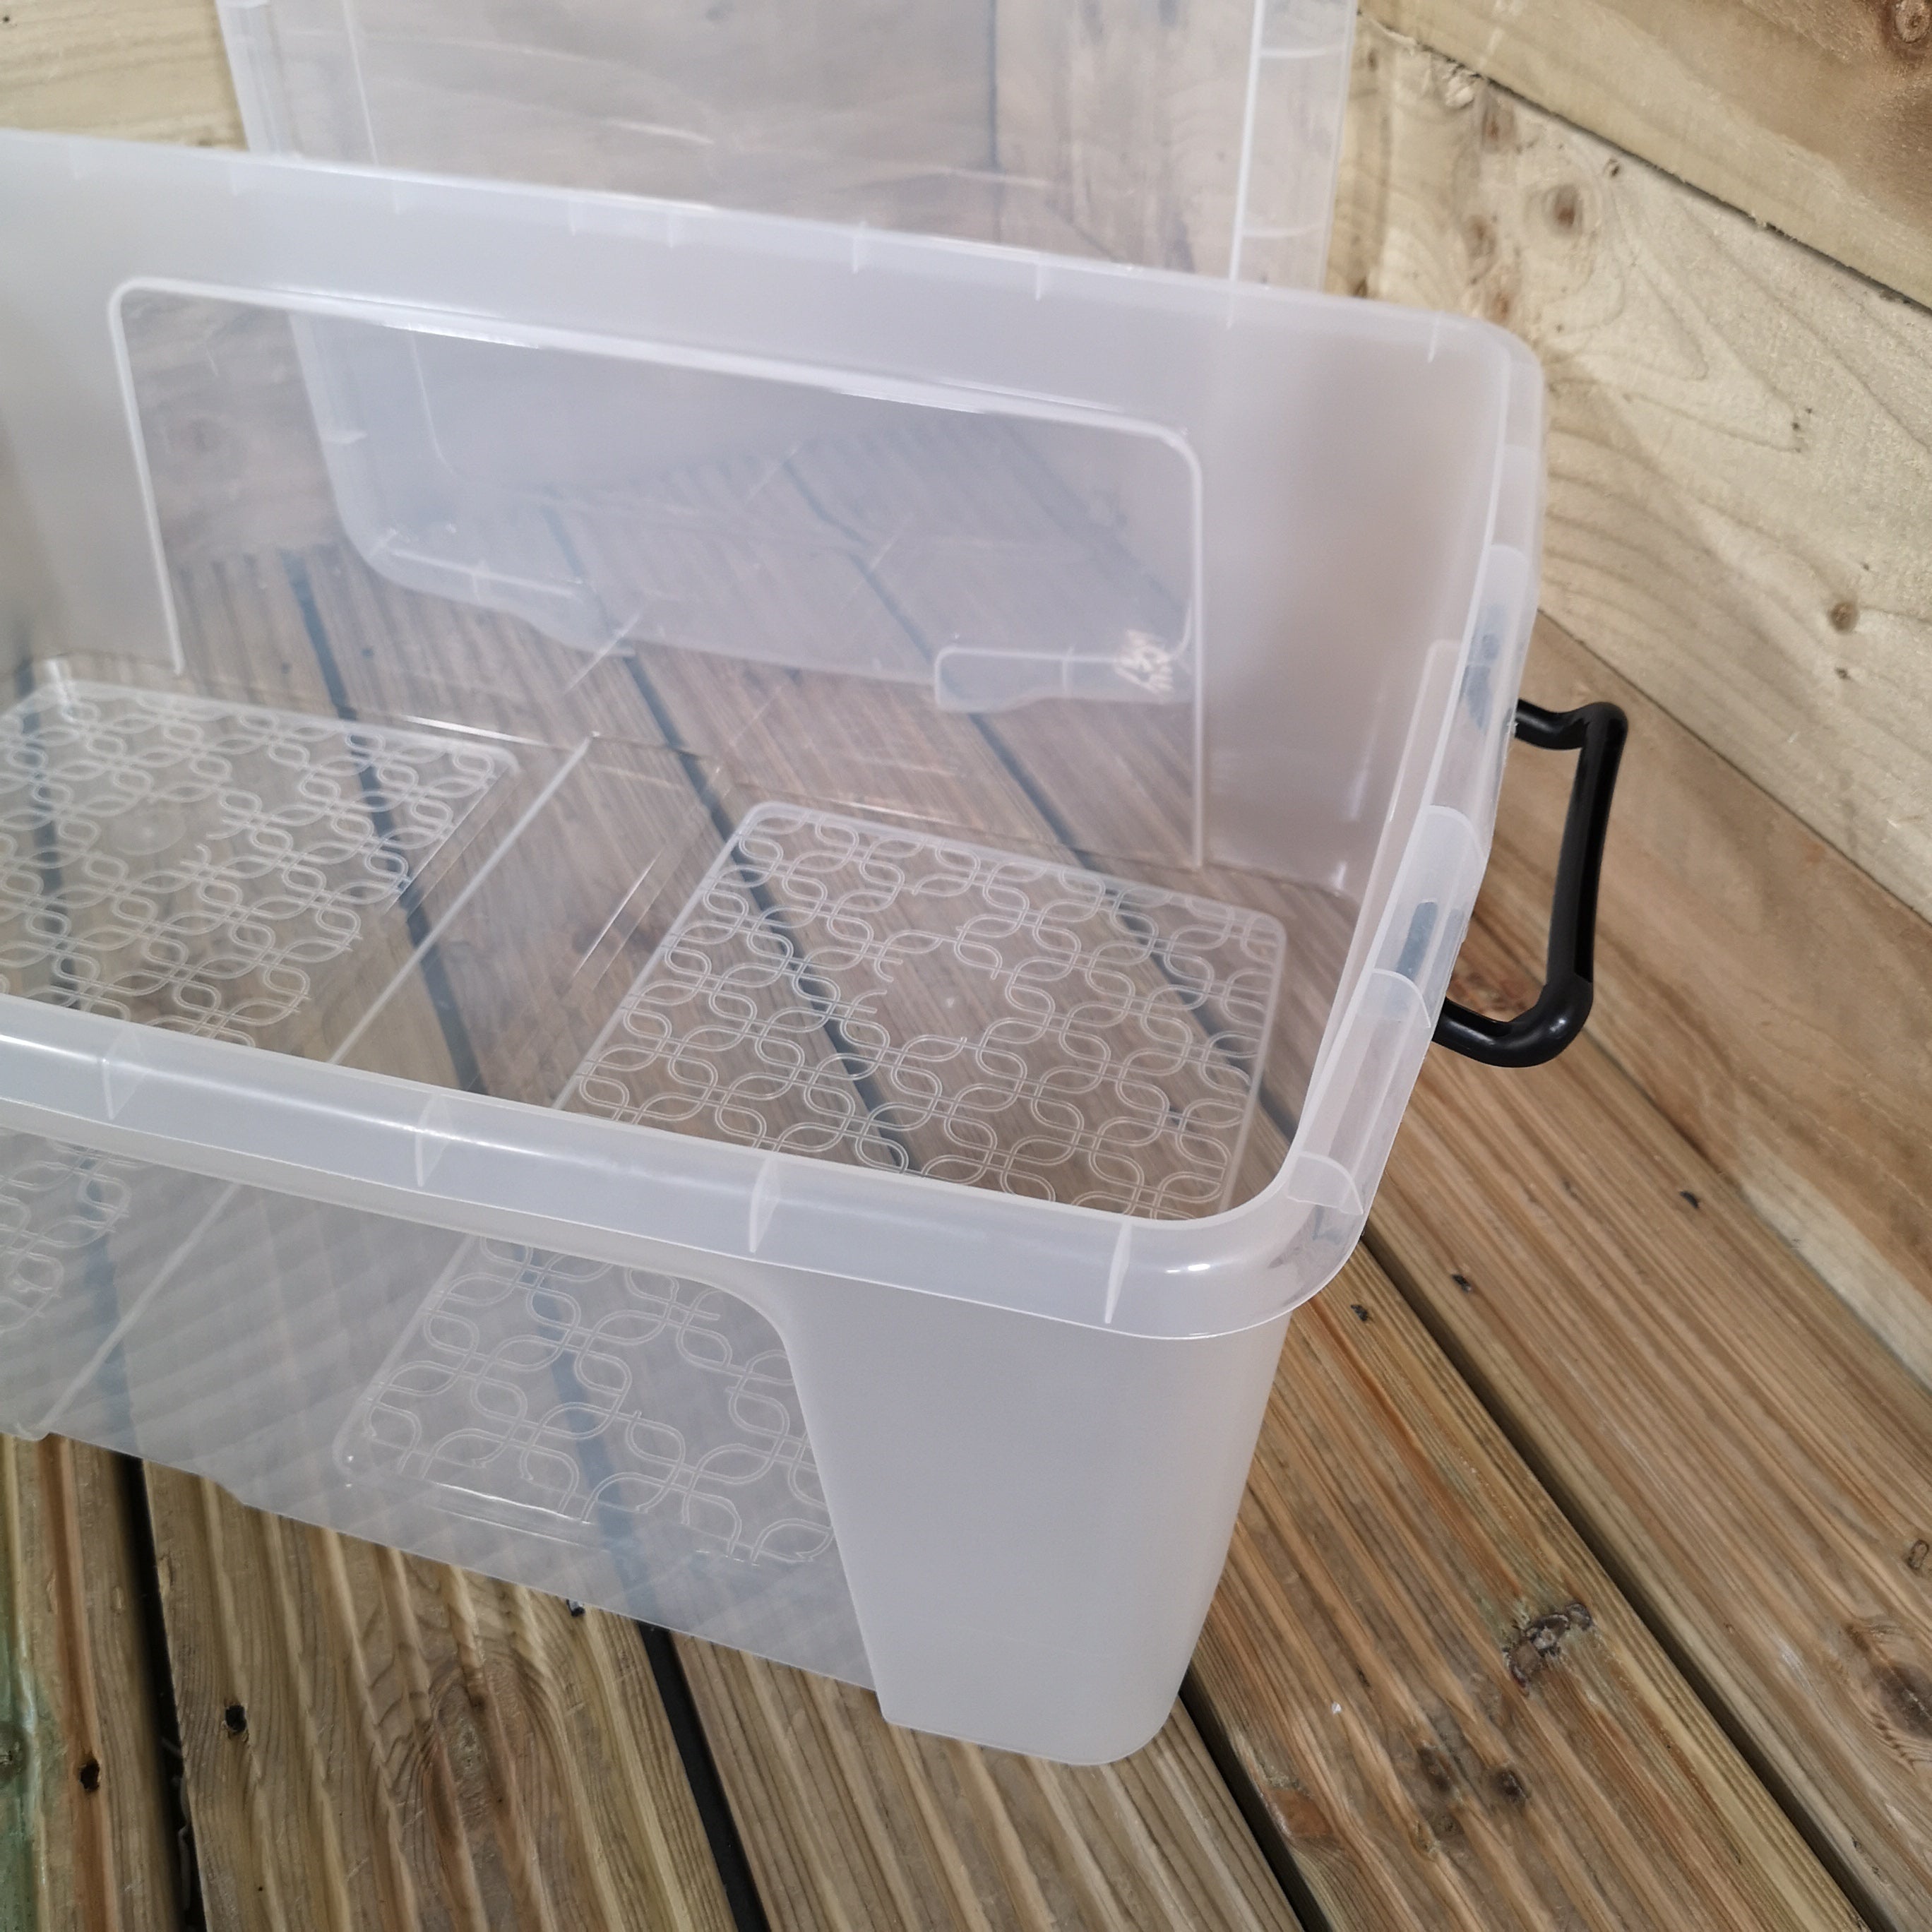 50L Smart Storage Box, Clear with Clear Extra Strong Lid, Stackable and Nestable Design Storage Solution